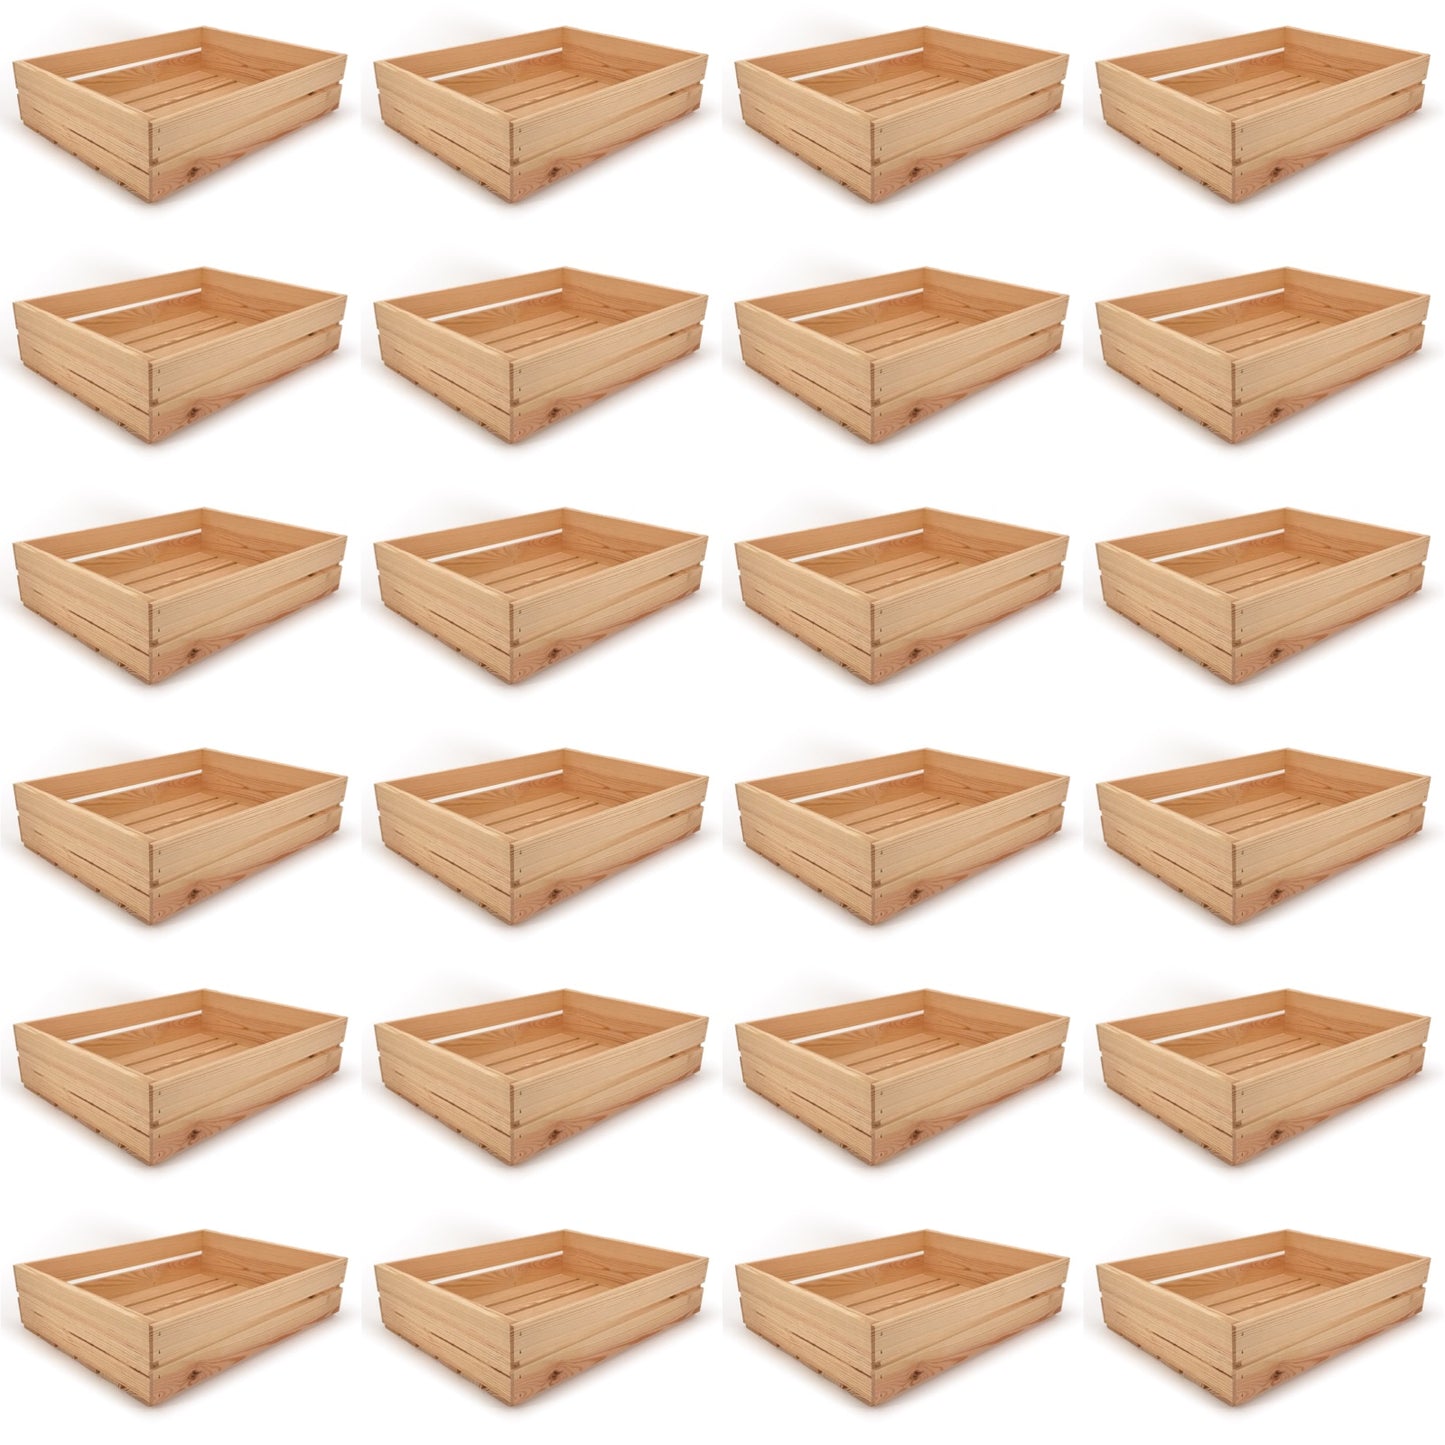 24 Small wooden crates22x17x5.25, 6-WS-22-17-5.25-NX-NW-NL, 12-WS-22-17-5.25-NX-NW-NL, 24-WS-22-17-5.25-NX-NW-NL, 48-WS-22-17-5.25-NX-NW-NL, 96-WS-22-17-5.25-NX-NW-NL